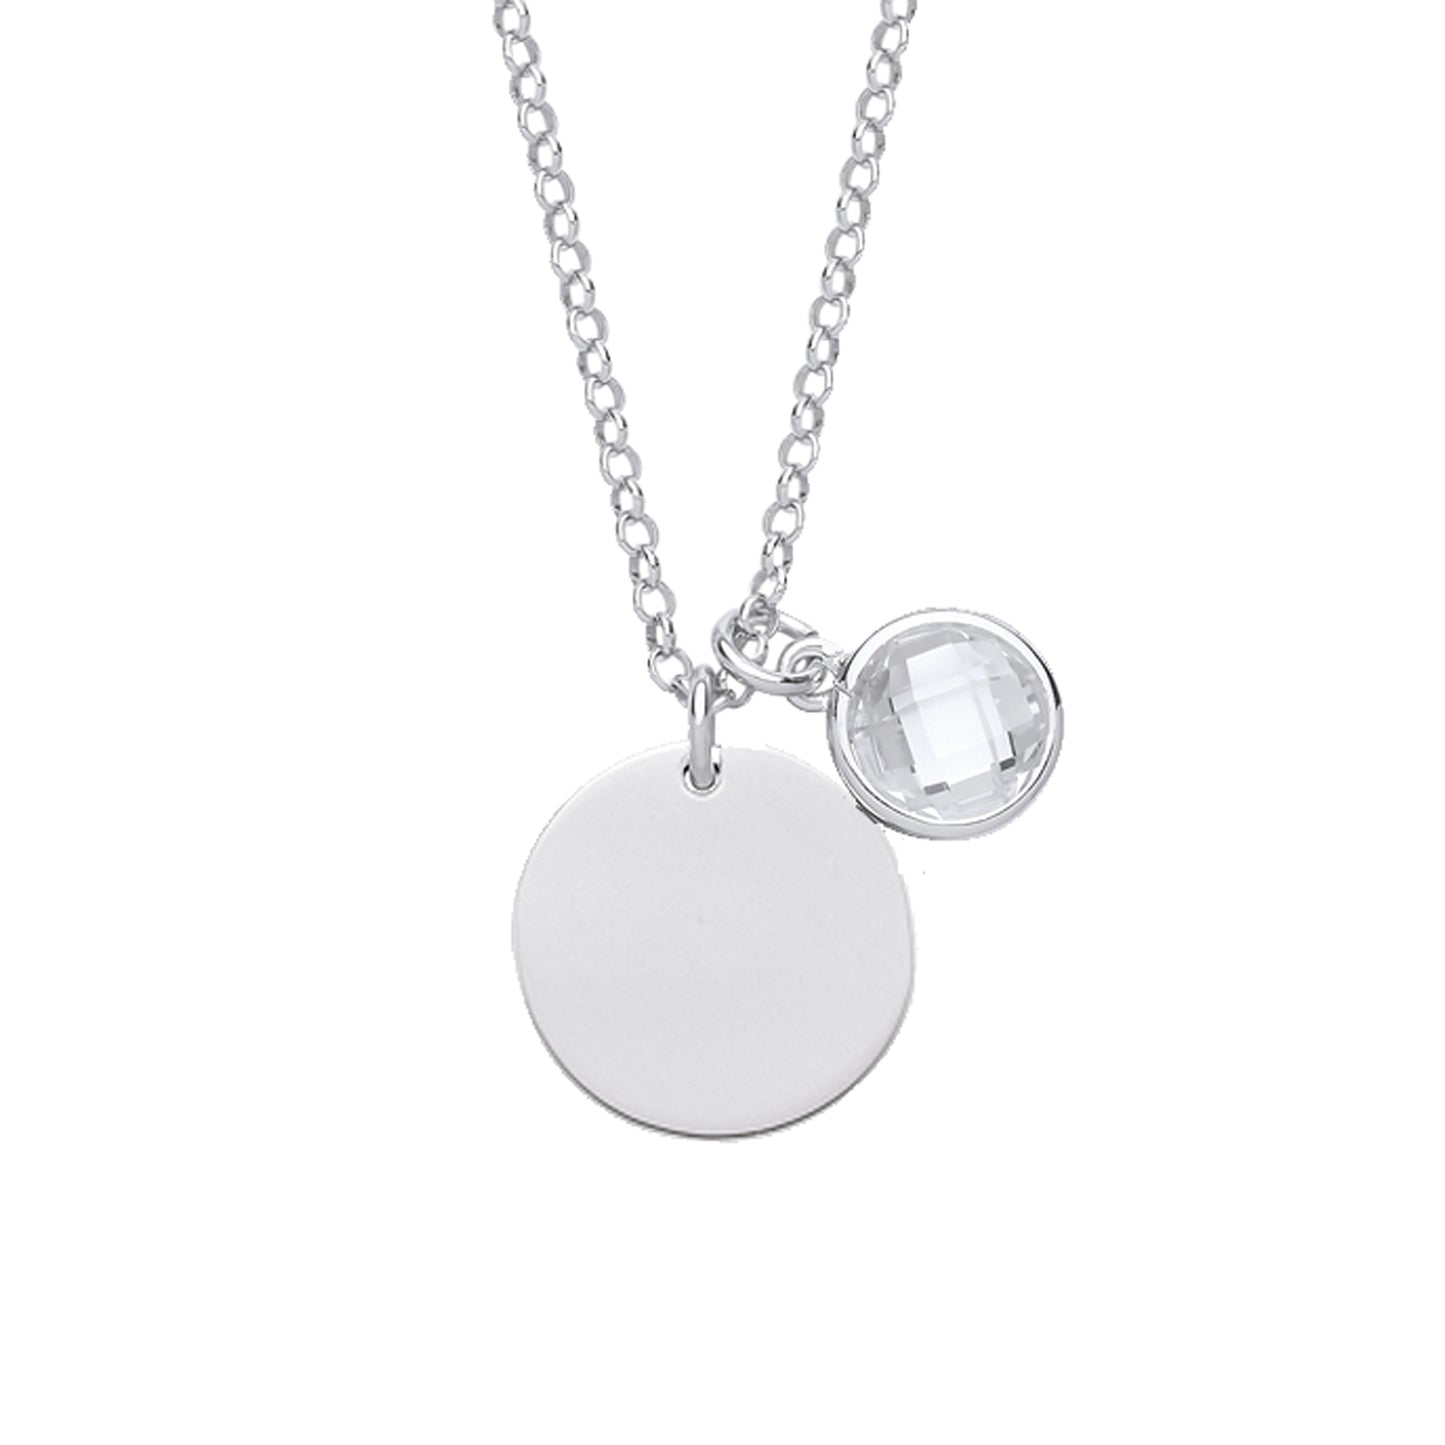 Silver  CZ Birthstone Round Tag Necklace 16" 15mm - GVK338CRY